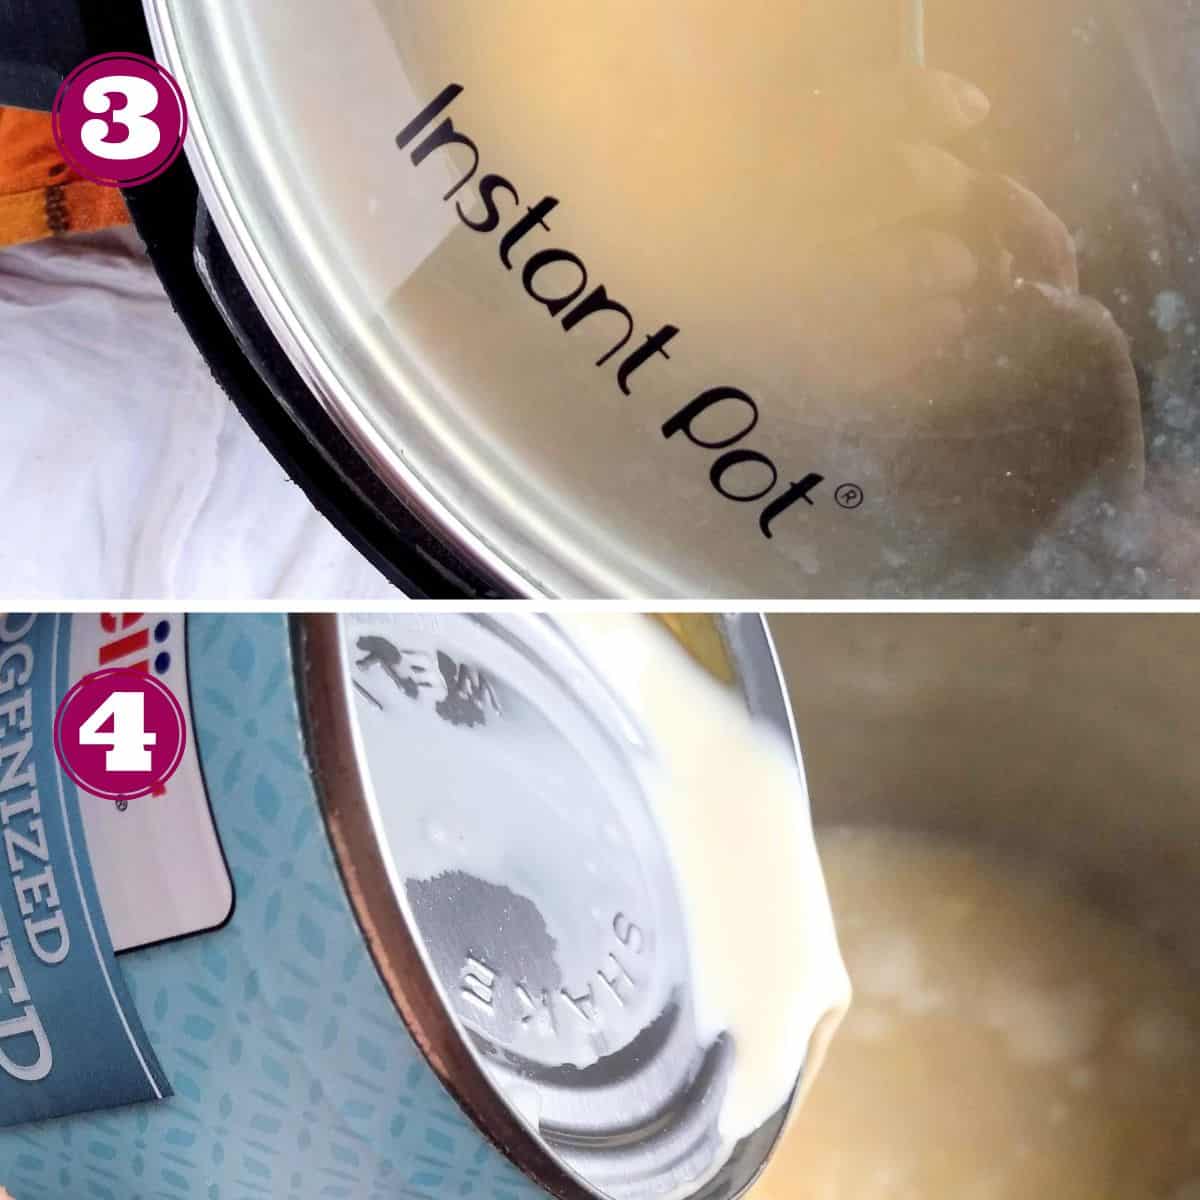 Step 3 shows putting a glass Instant Pot lid on
Step 4 shows pouring in the evaporated milk